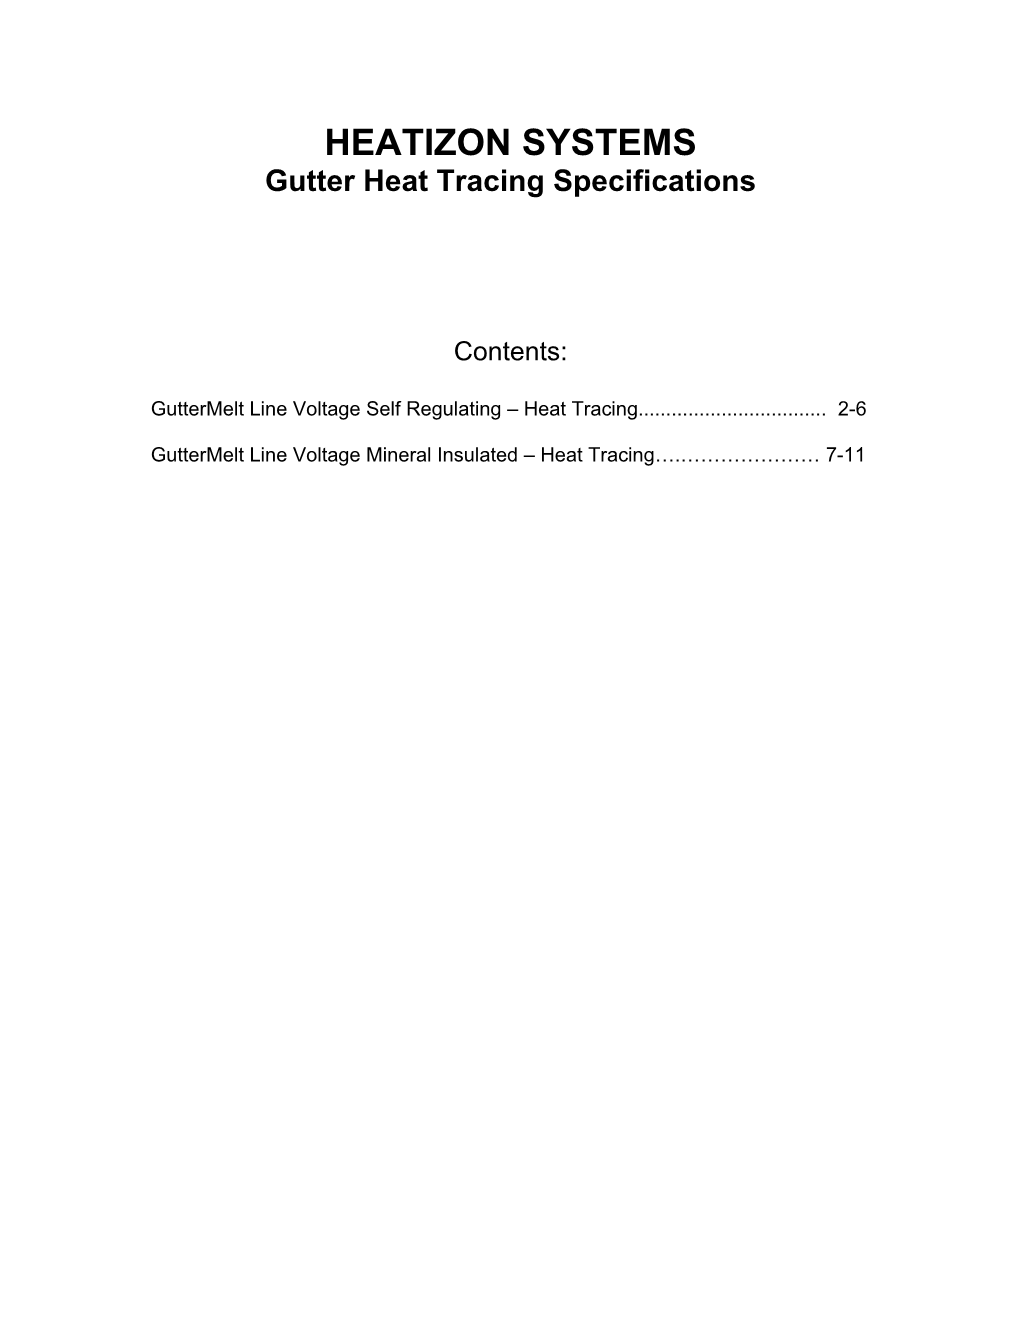 Gutter Heat Tracing Specifications